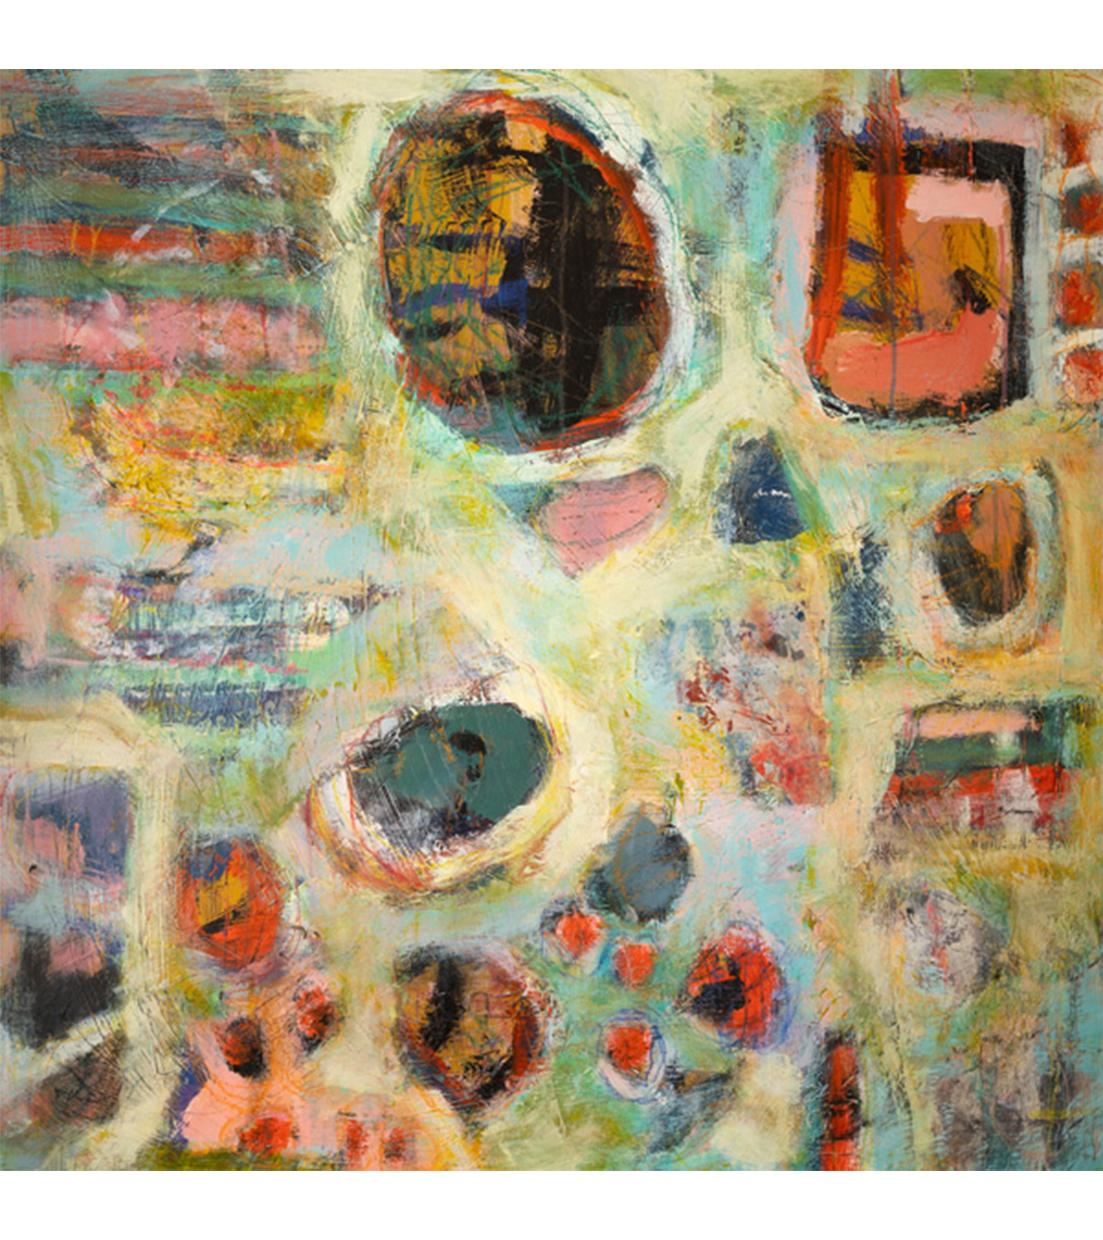 Lesley Anne Spowart, an abstract artist hailing from Cape Cod, Massachusetts, is renowned for her transformative creations that blur the boundaries of mediums and styles. 

With a diverse academic background in Art History from the University of